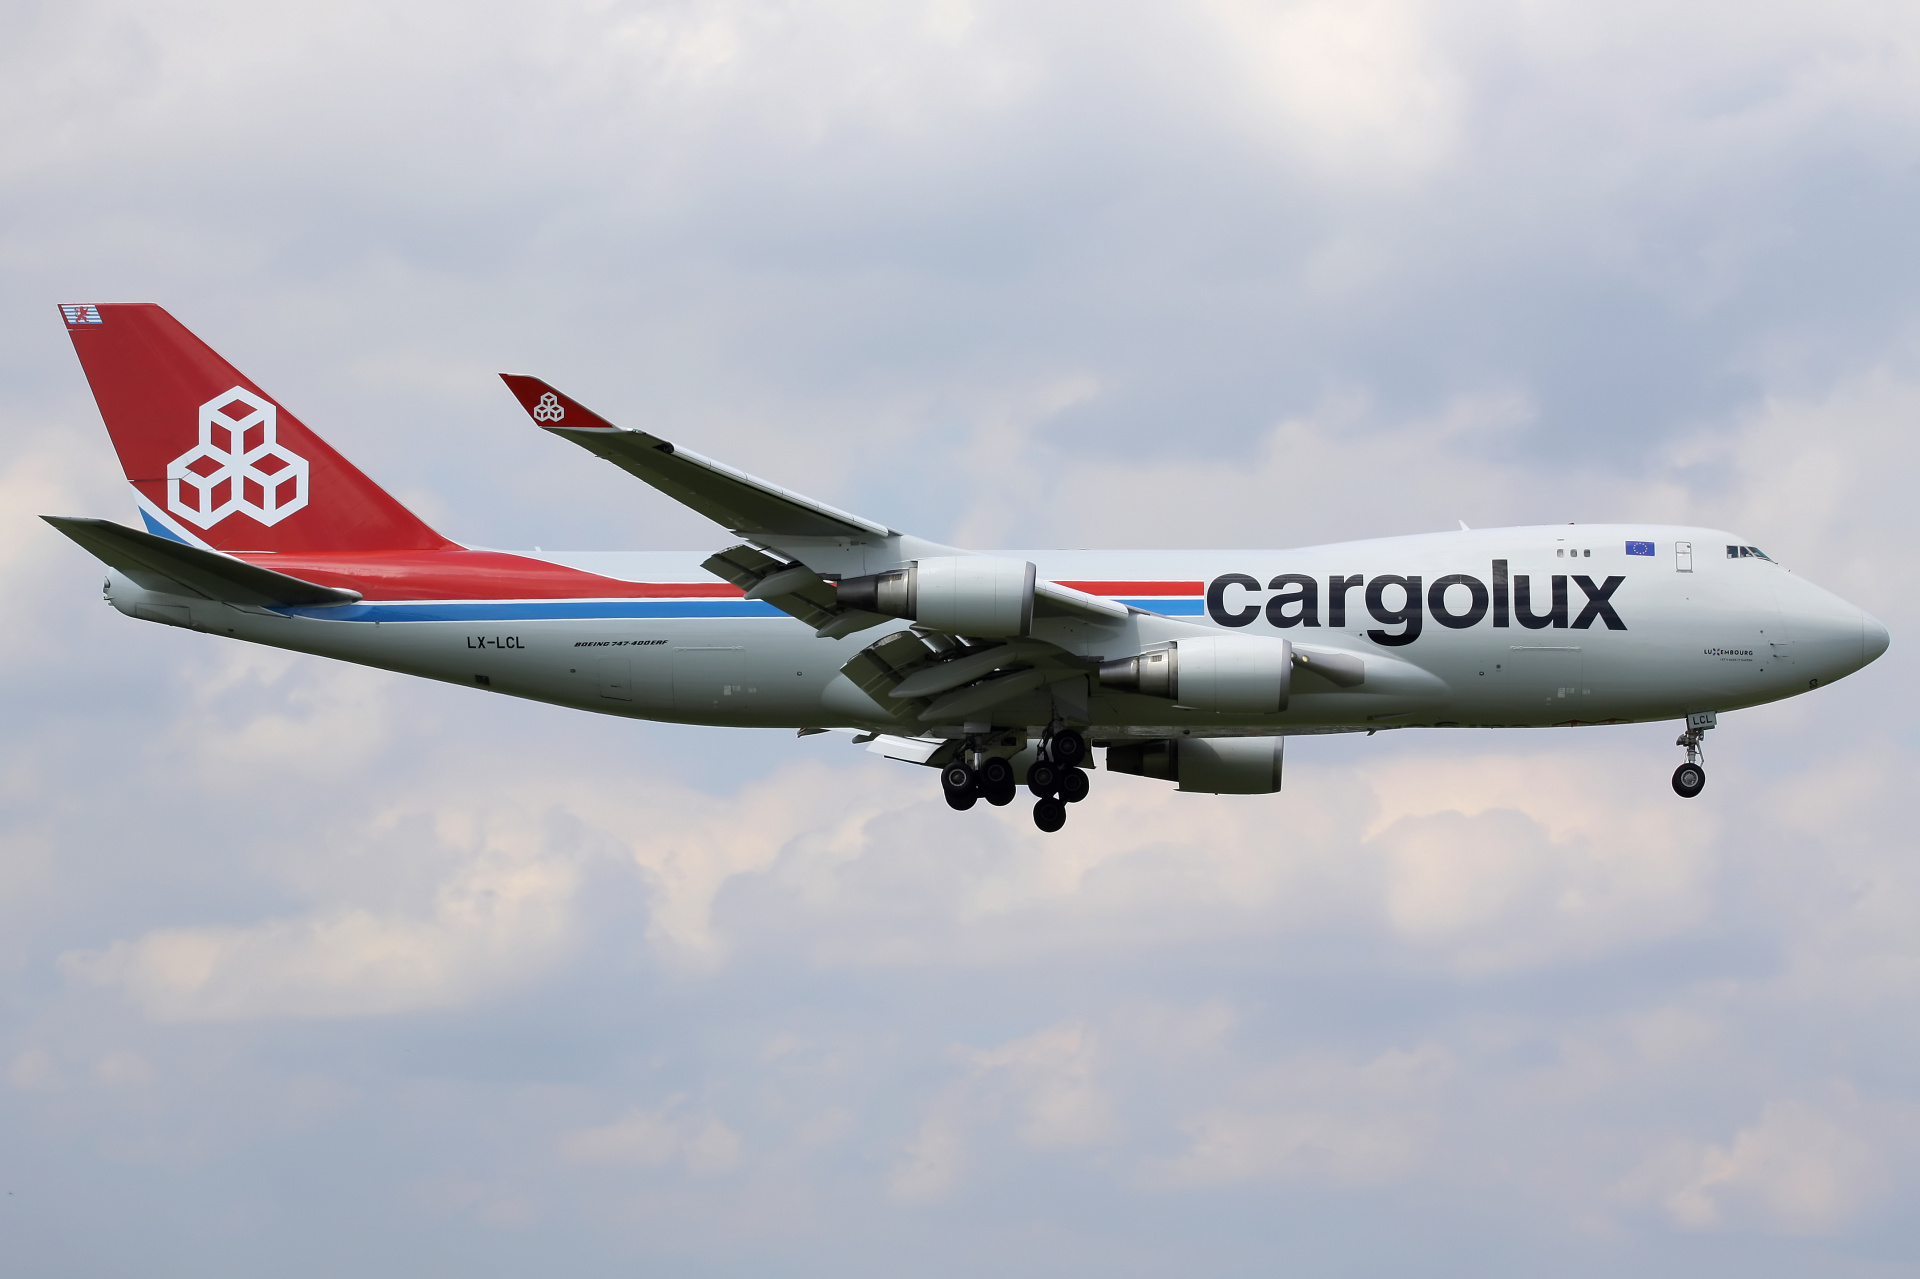 LX-LCL, Cargolux Airlines (Samoloty » Spotting na Schiphol » Boeing 747-400F)